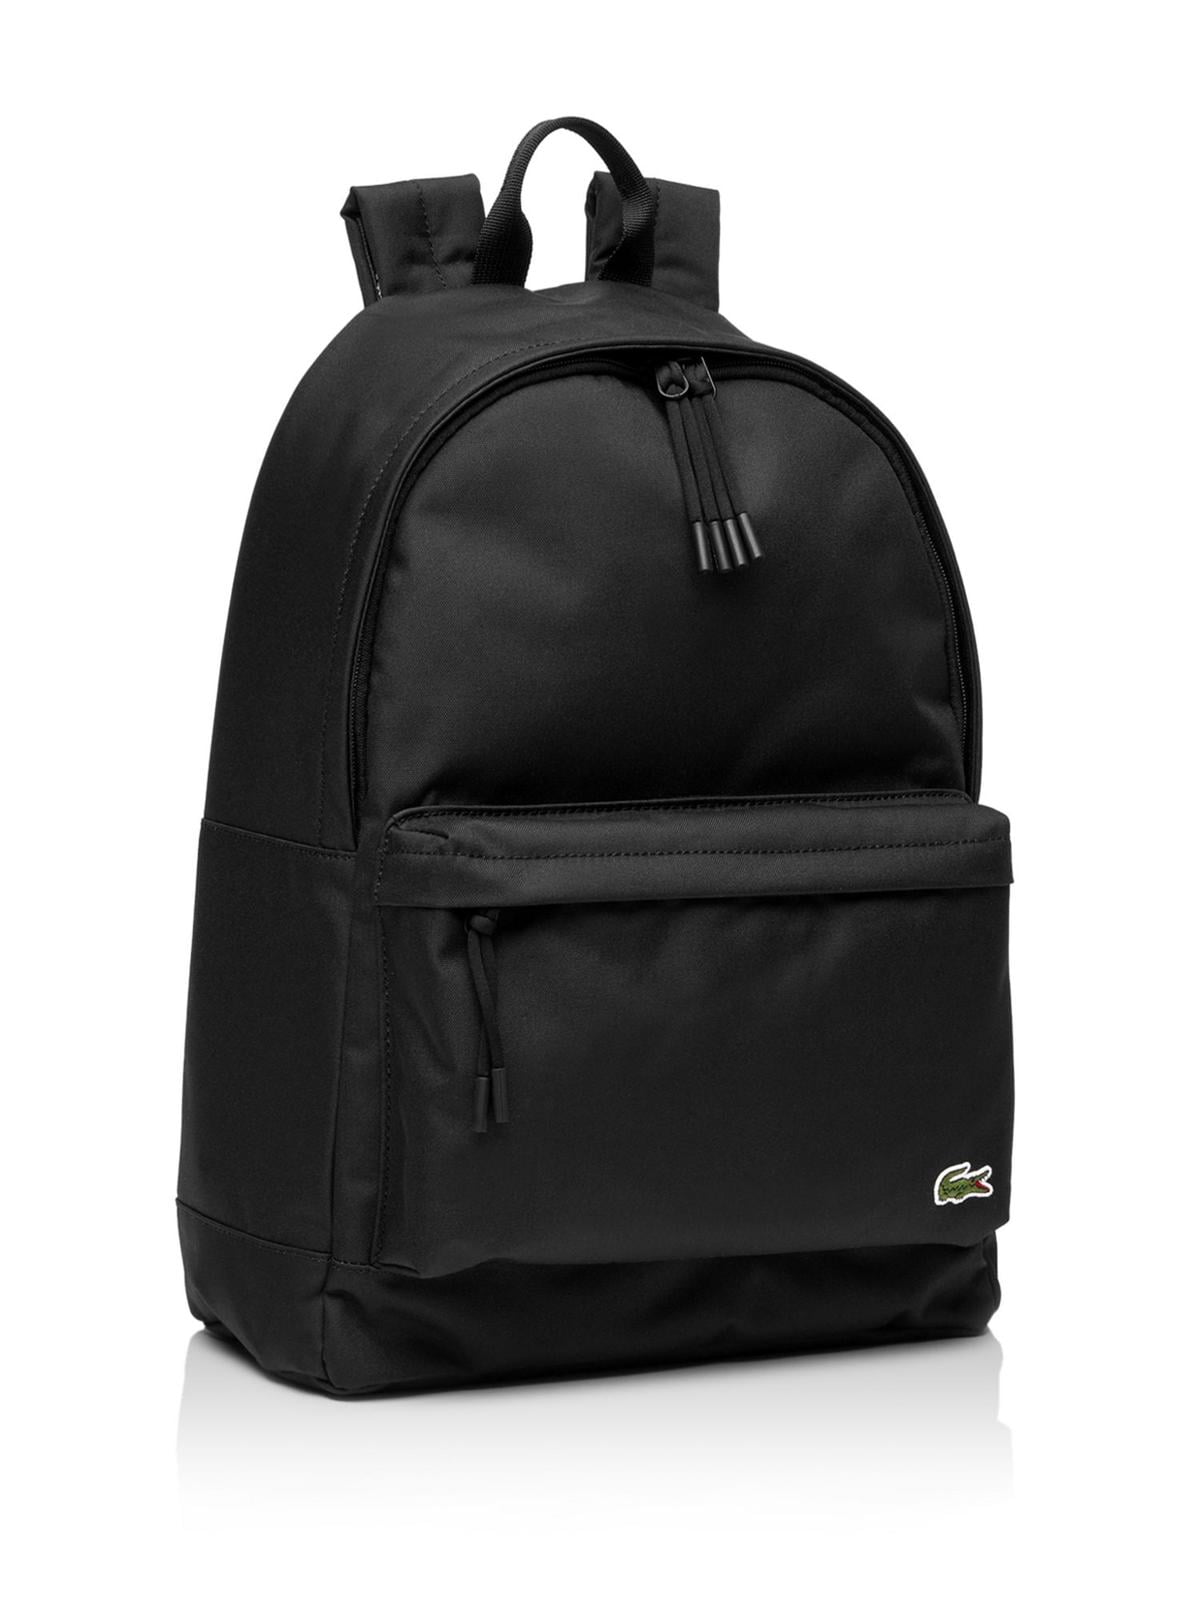 LACOSTE Men's Back Mesh Padding Top Handle Solid Embroidered Double Flat Strap Backpack - Walmart.com